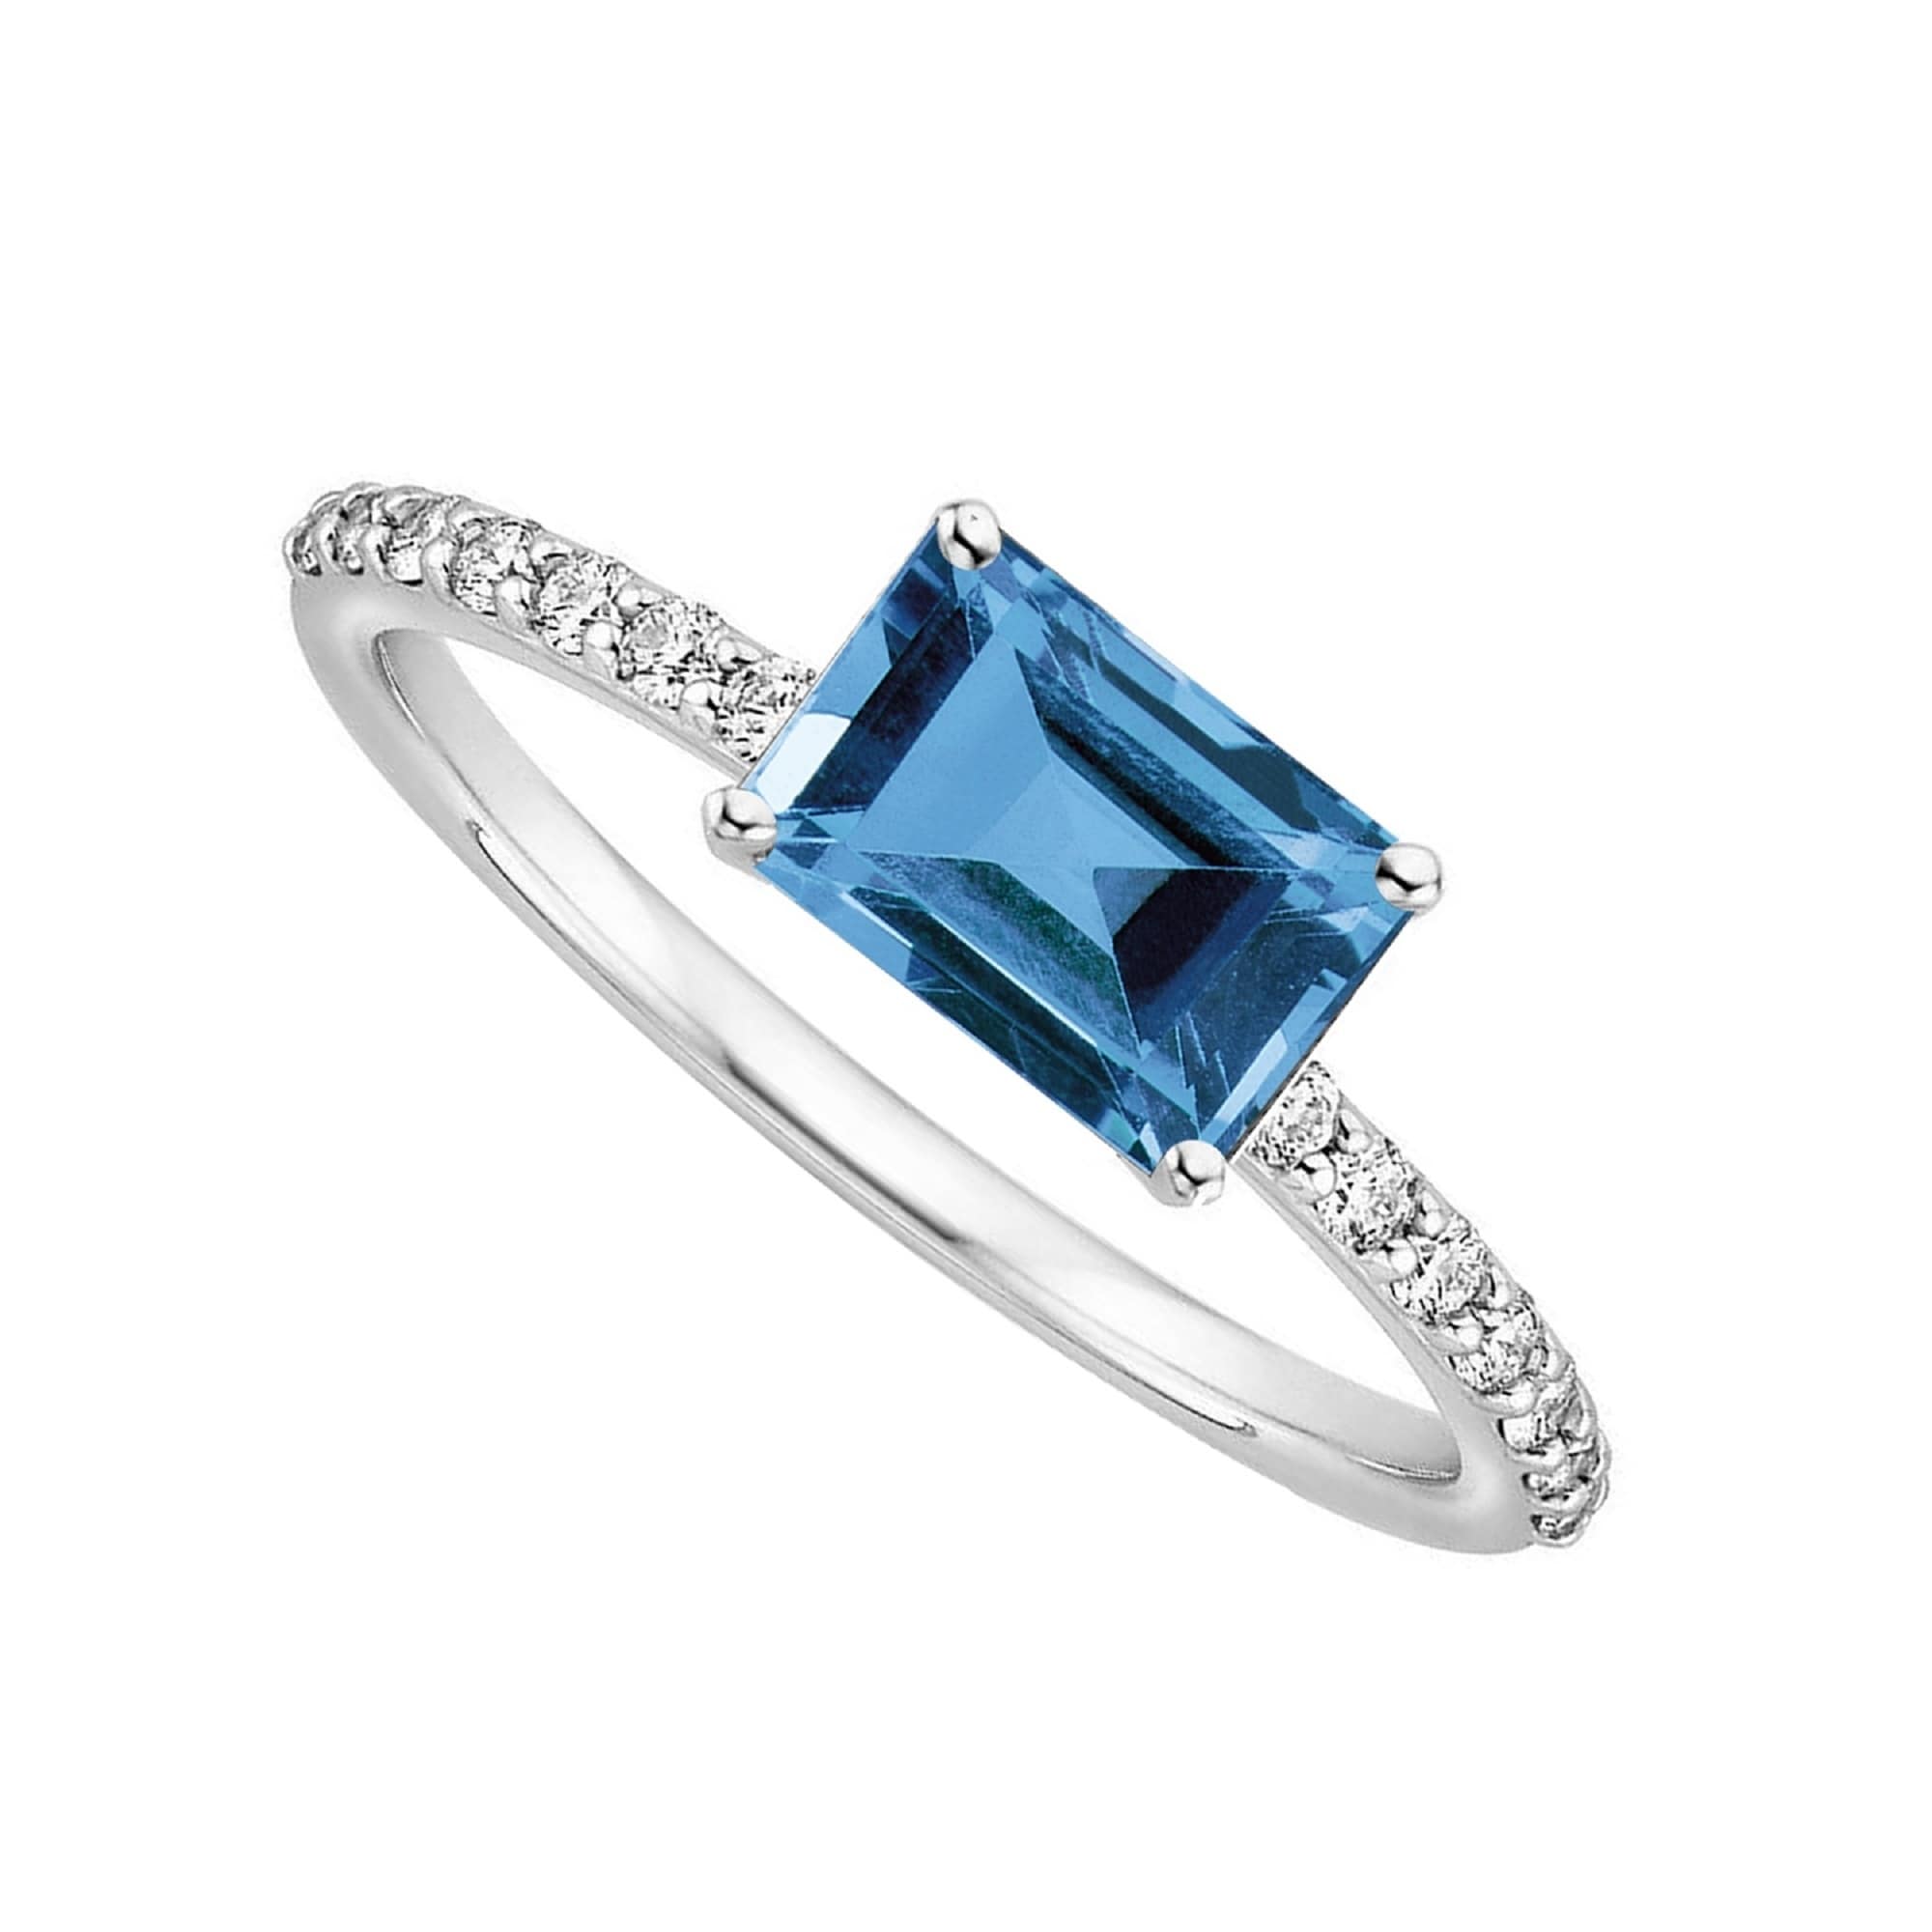 Details about   9x7mm Natural London Blue Topaz Ring With White Topaz in 925 Sterling Silver